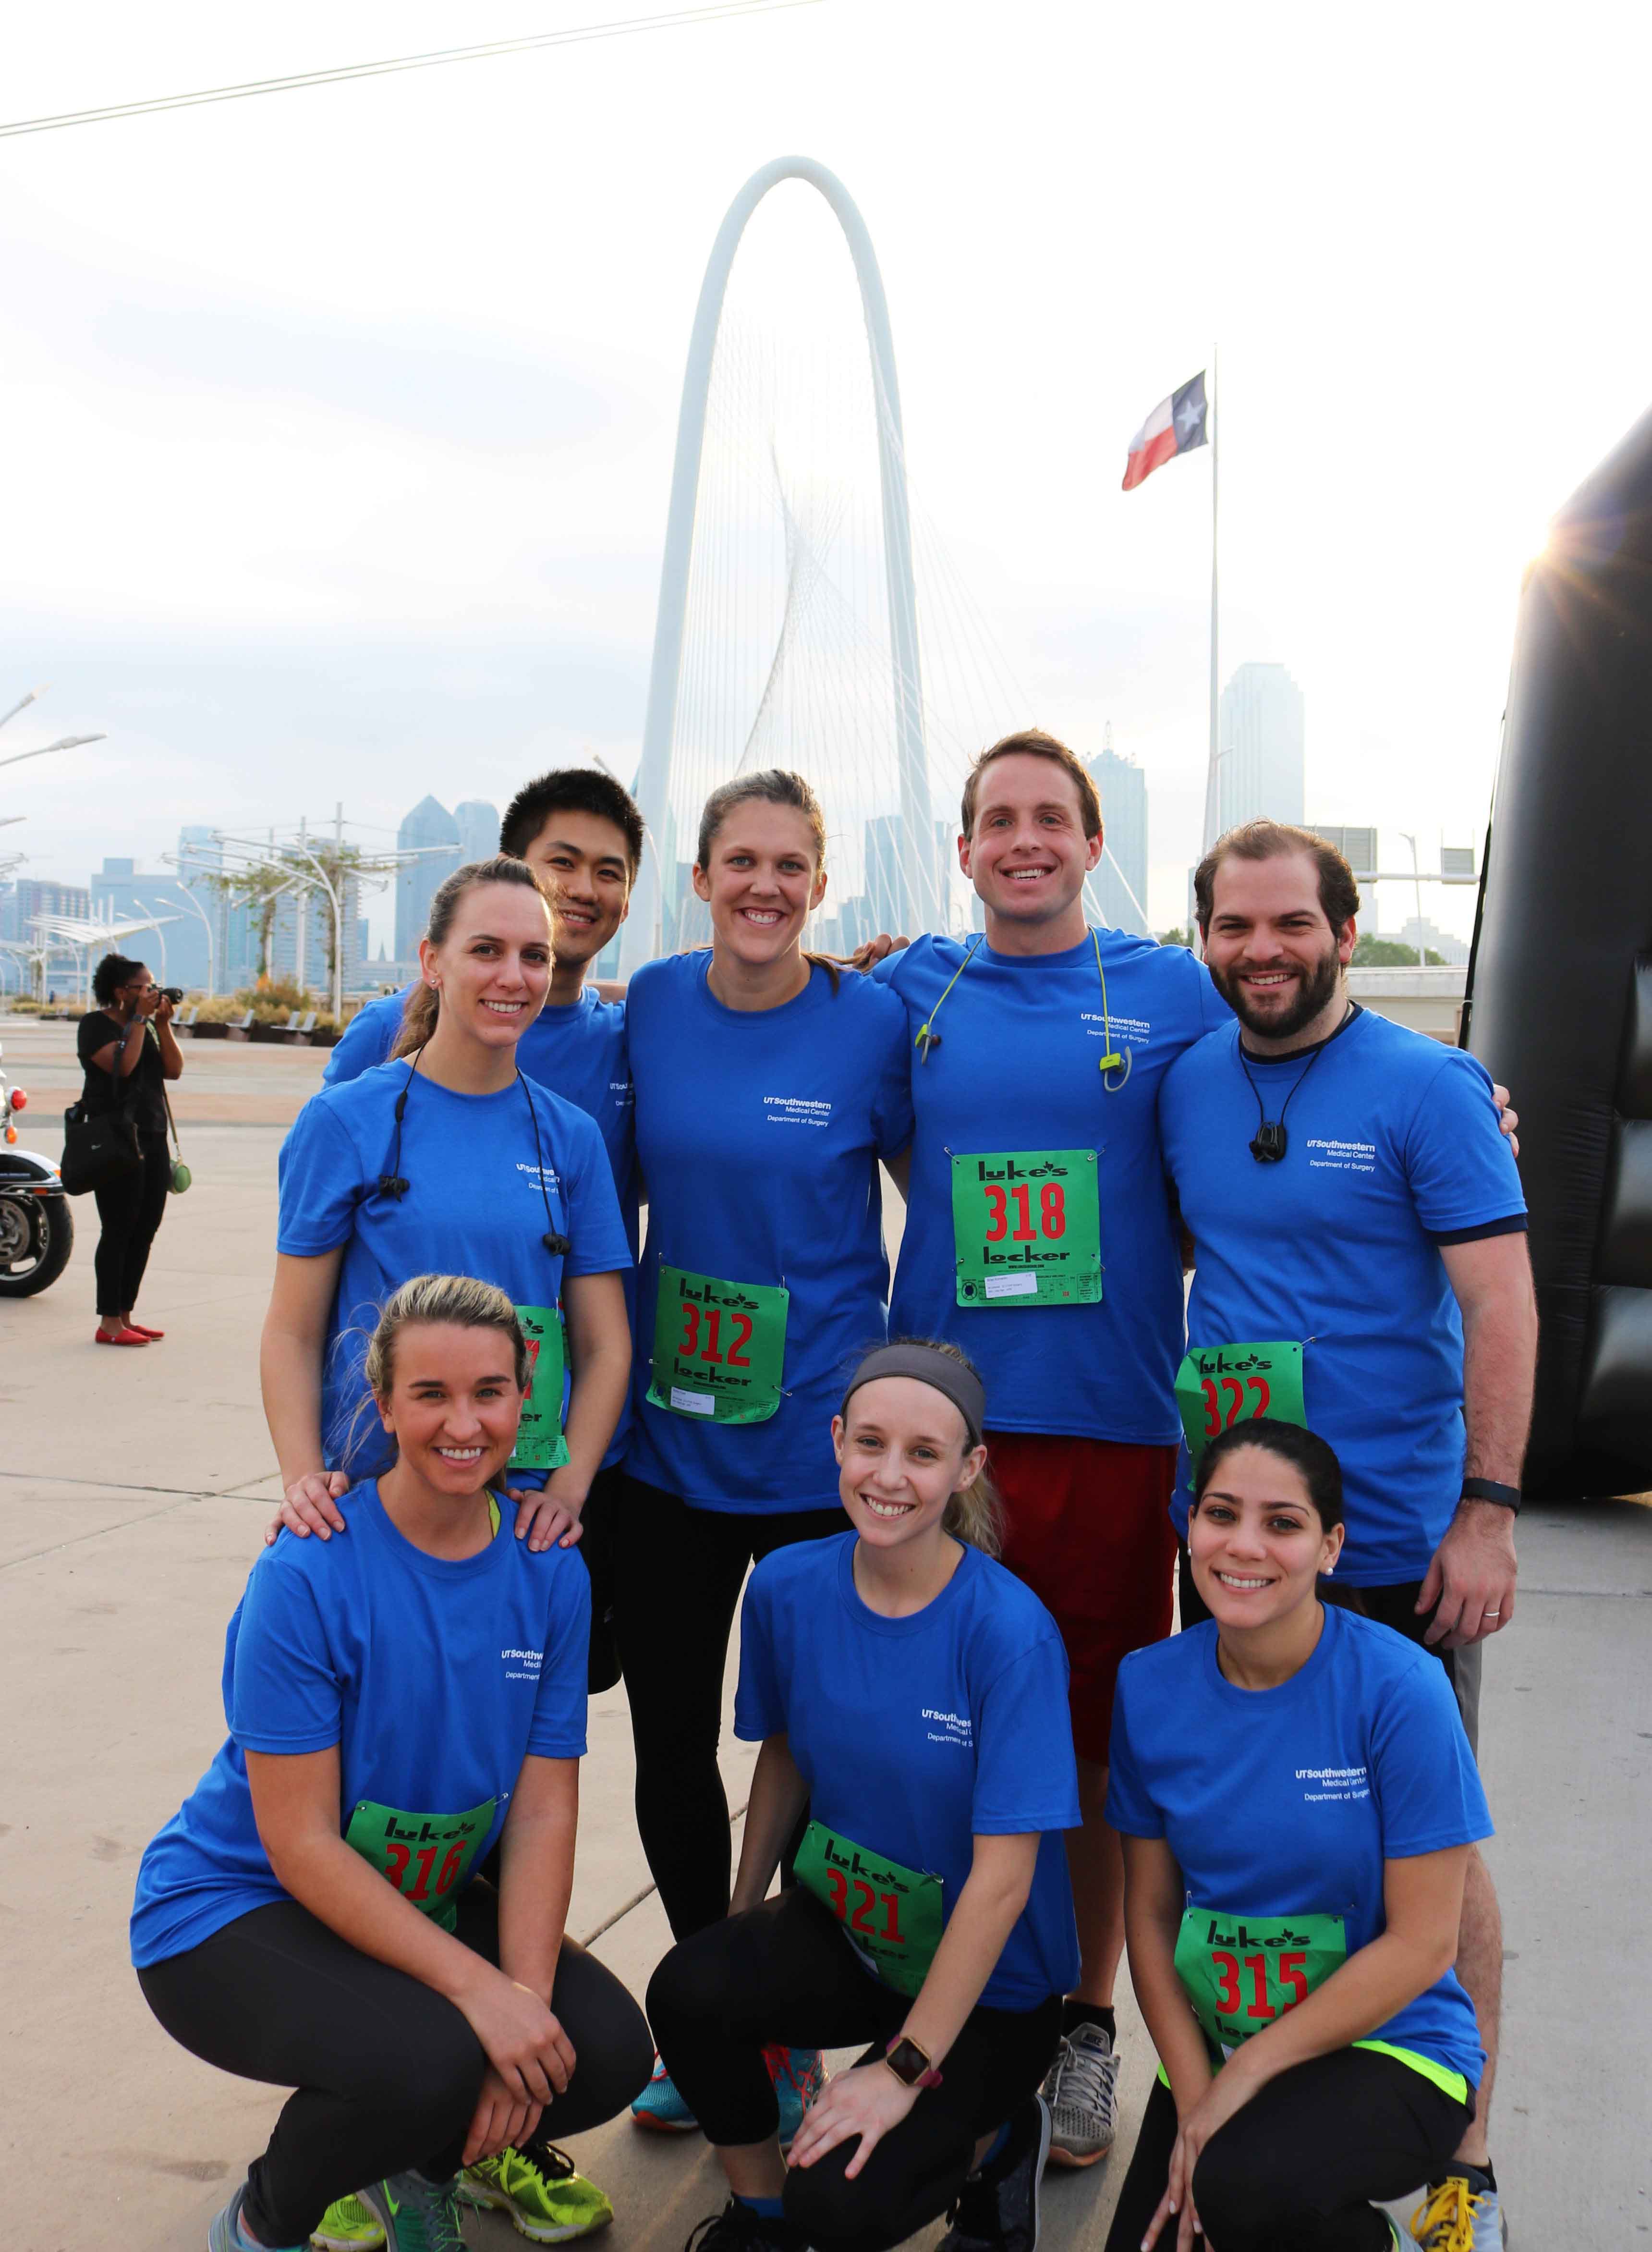 Residents participated in the Freedom Run 5K, benefiting the Dallas Assist the Officer Foundation.